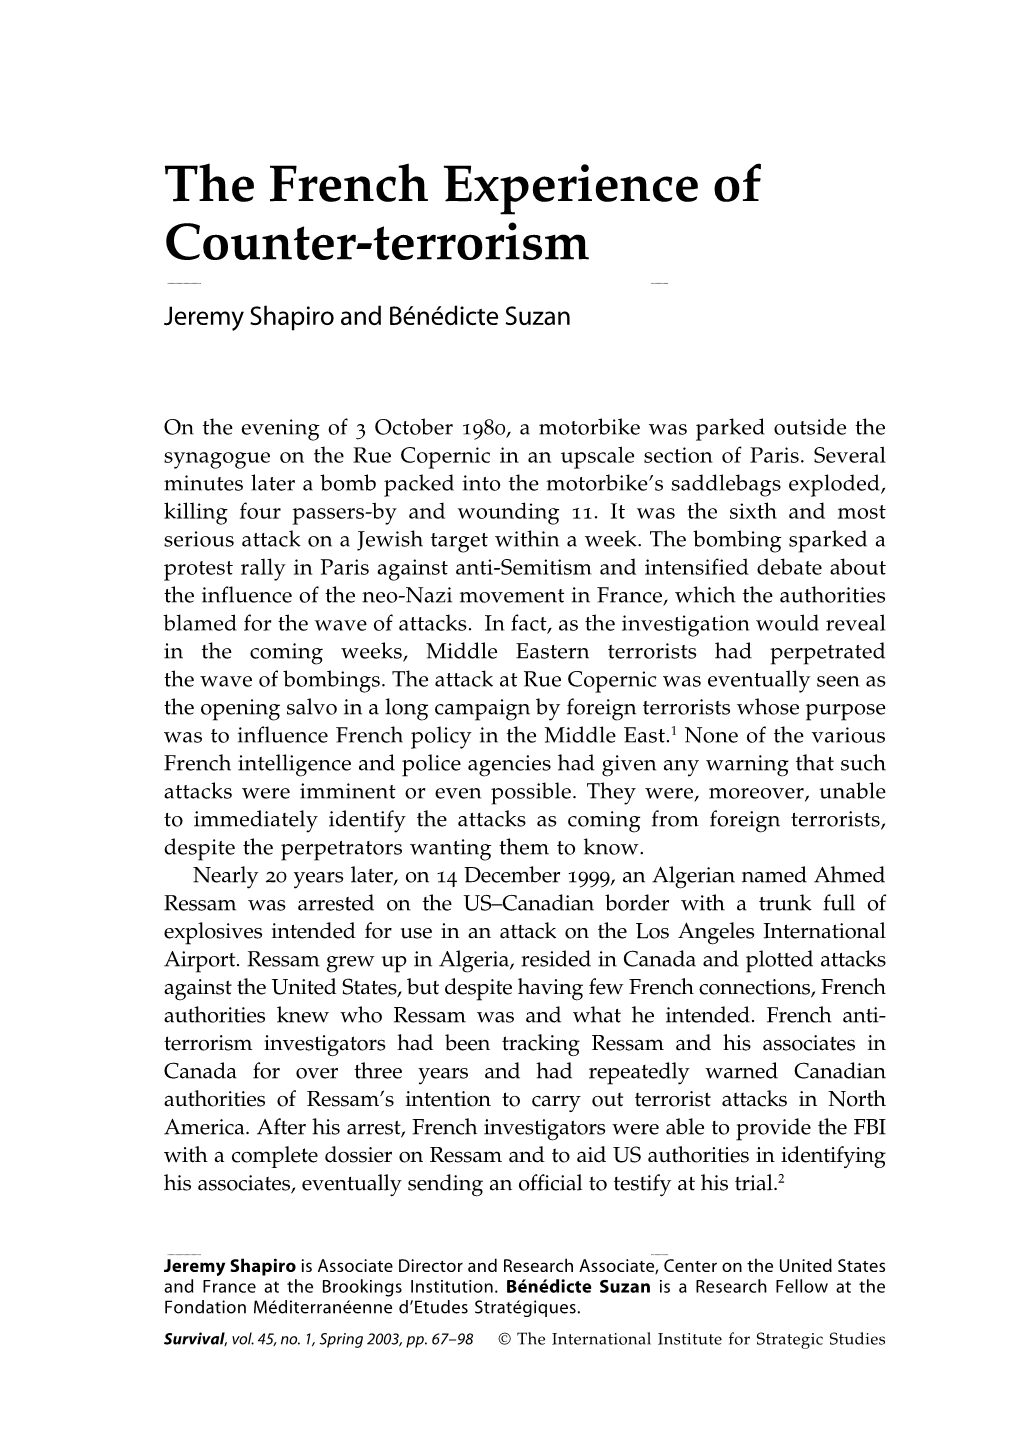 The French Experience of Counter-Terrorism 67 the French Experience Of